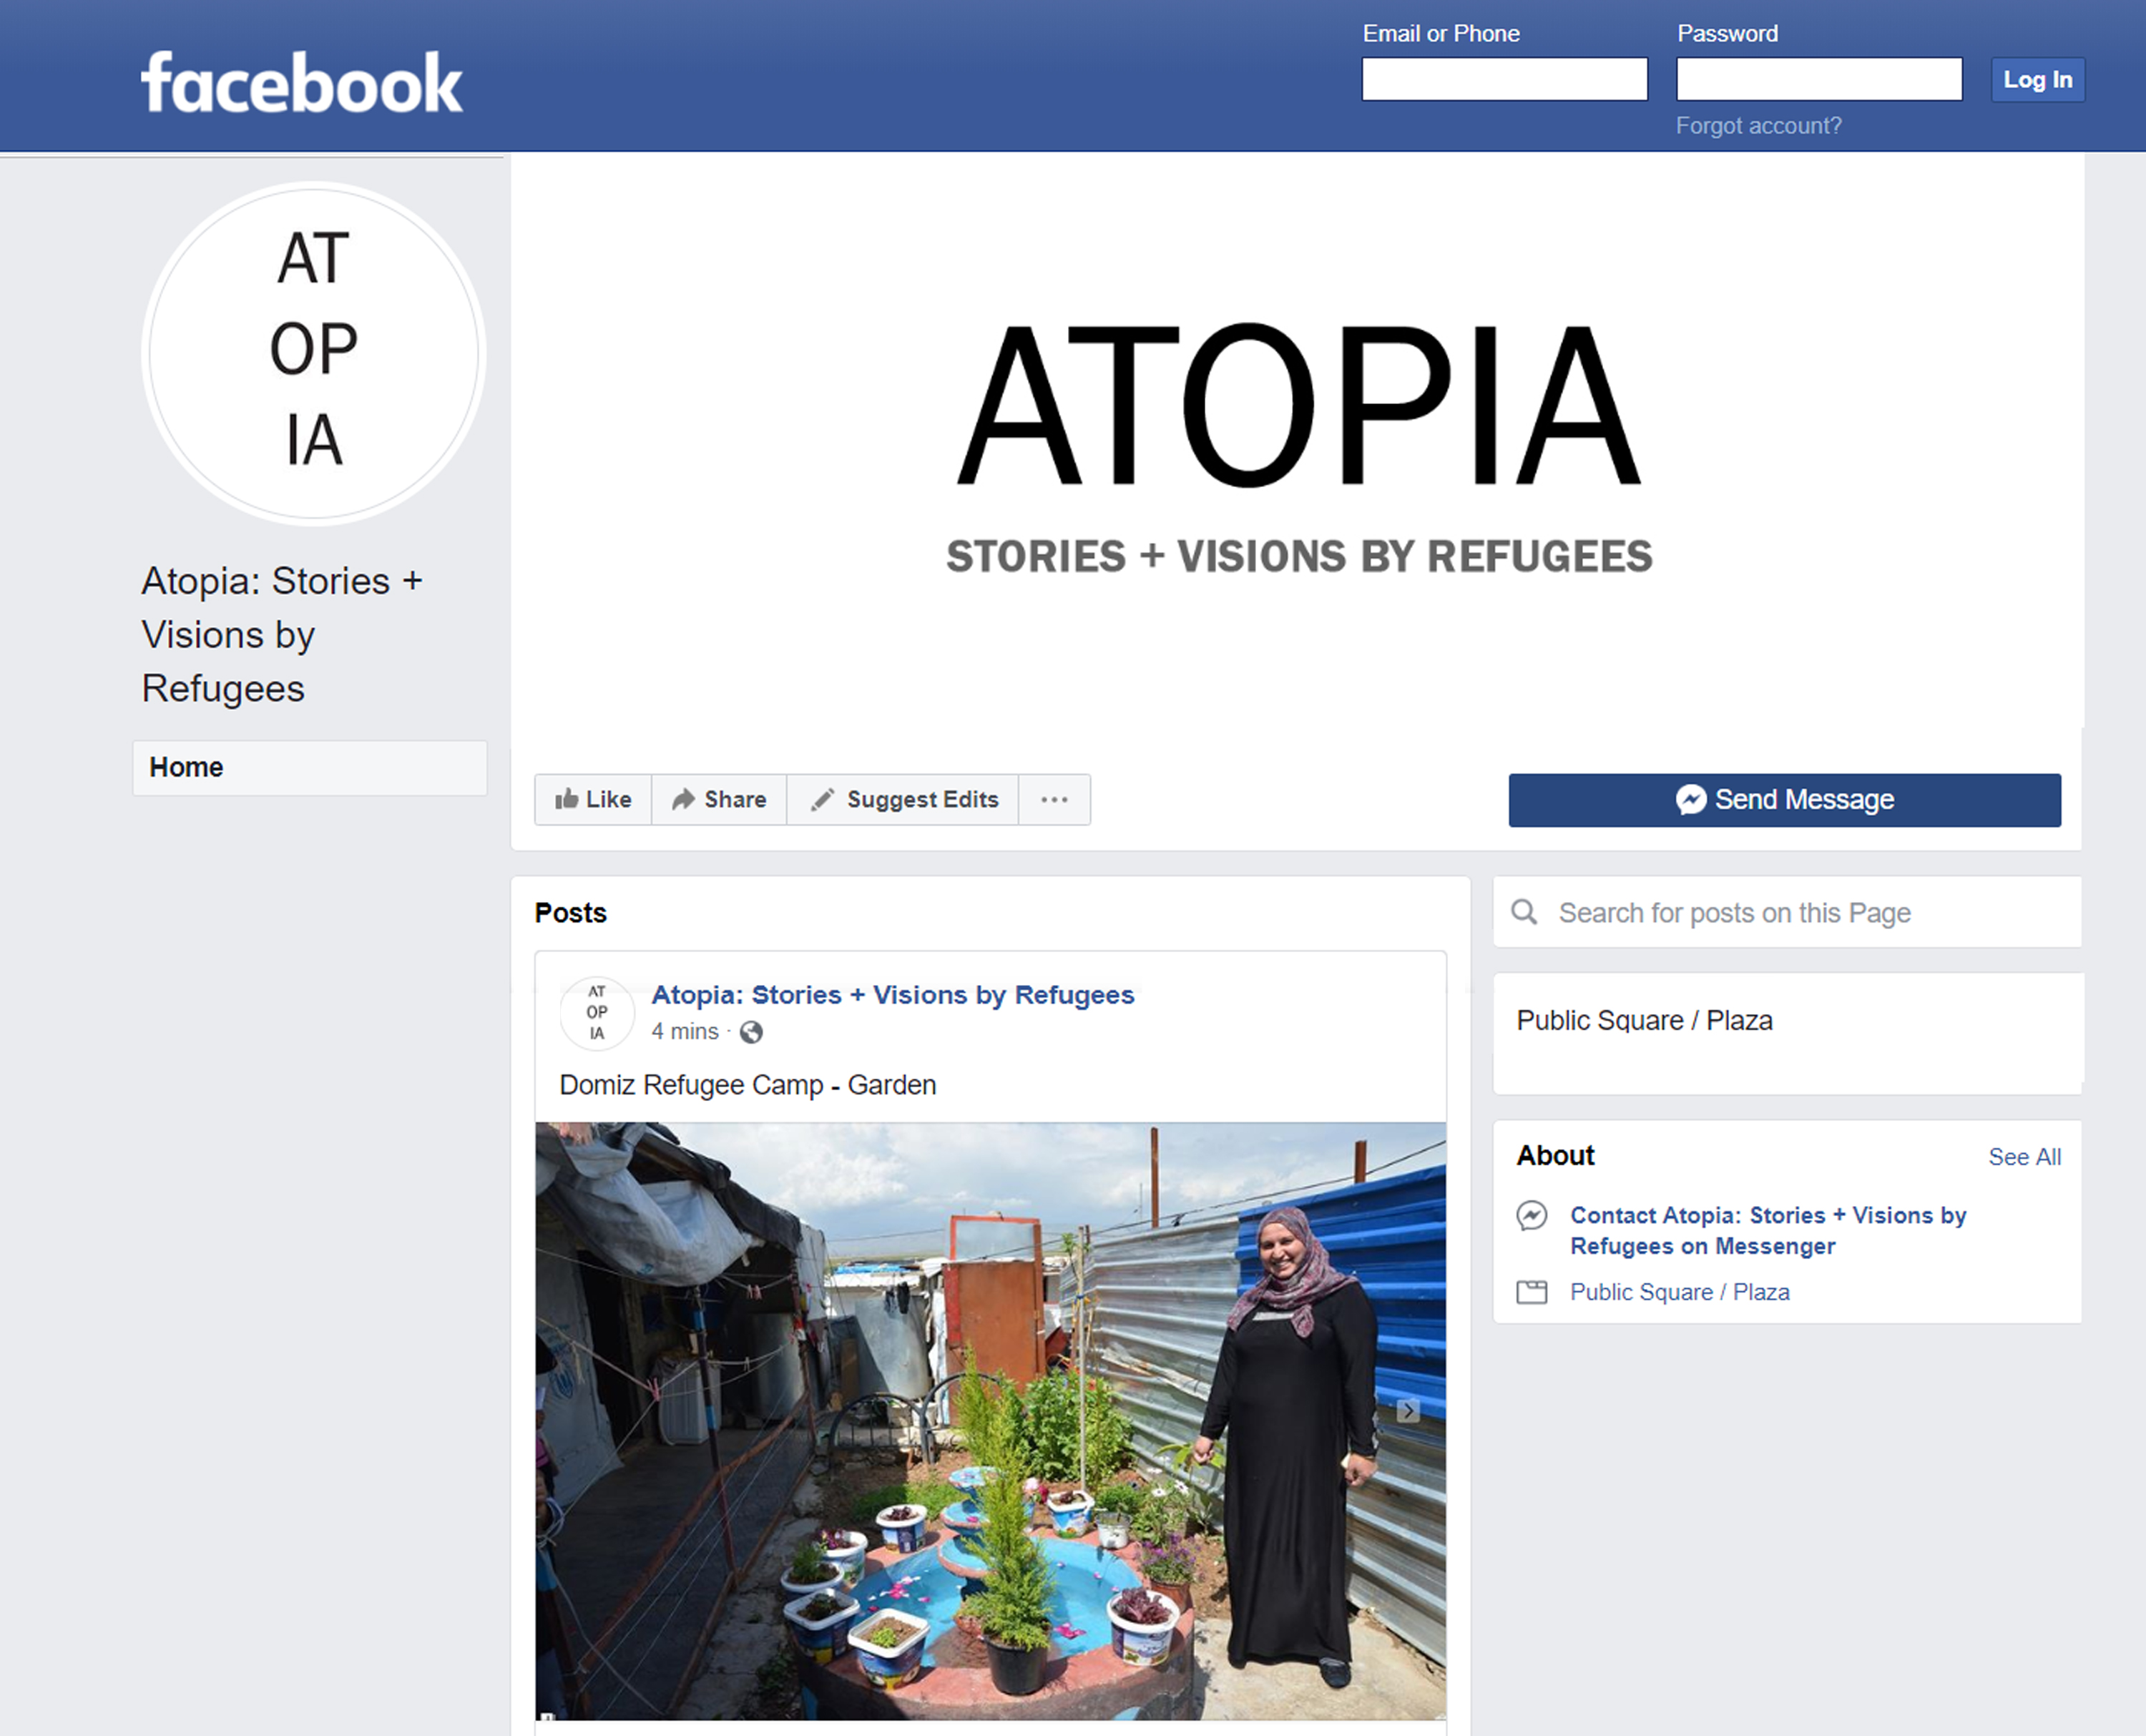 ATOPIA: STORIES + VISIONS BY REFUGEES